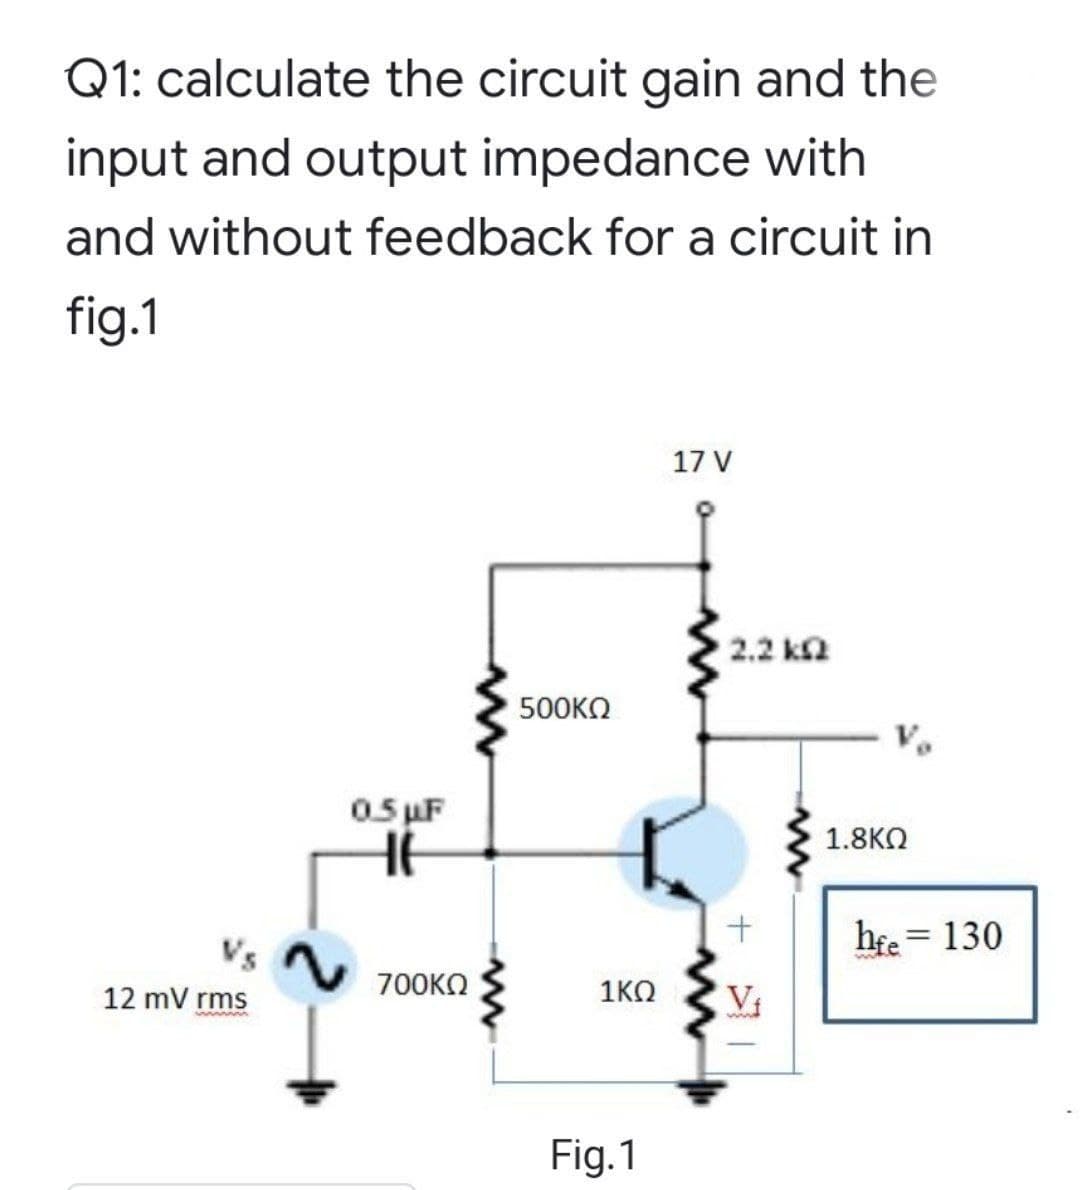 Q1: calculate the circuit gain and the
input and output impedance with
and without feedback for a circuit in
fig.1
17 V
2.2 ka
500KΩ
05 uF
1.8KO
hee = 130
%3D
12 mV rms
700KO
1KO
V
Fig.1
